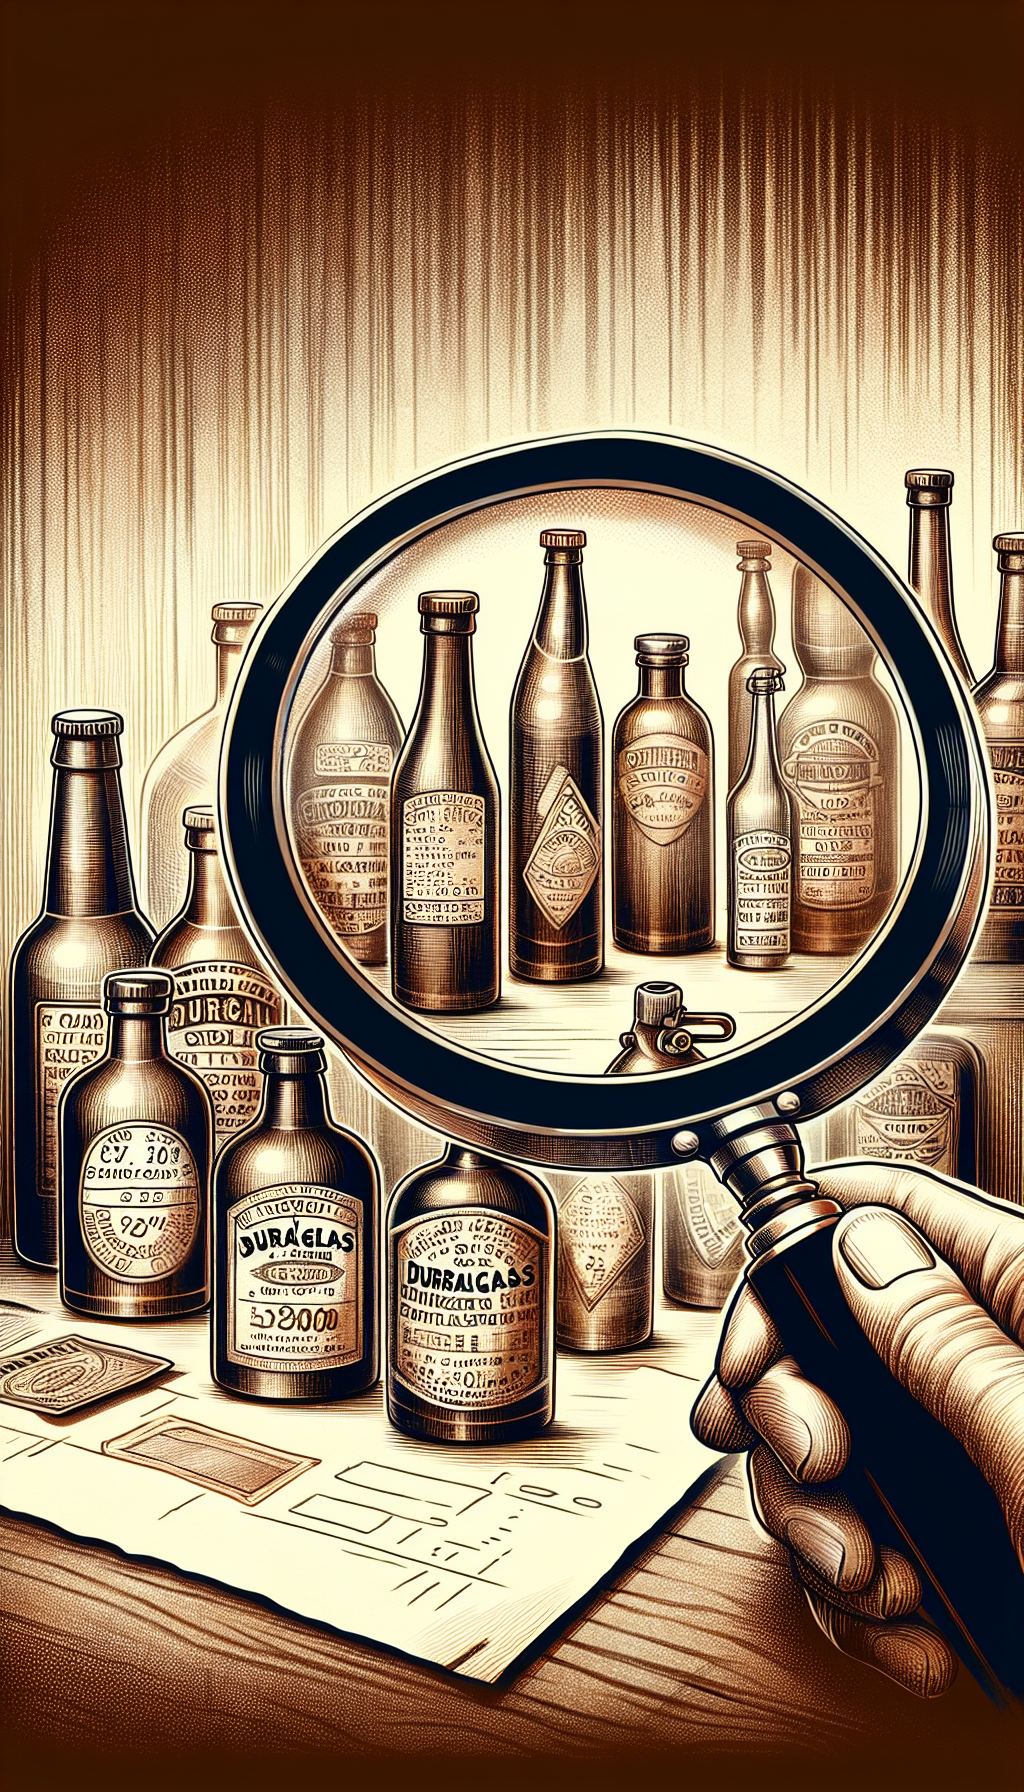 An illustration featuring a magnifying glass focusing on a cluster of Duraglas bottles, each etched with unique identifying hallmarks (e.g., date codes, manufacturer symbols). Under the glass, the bottles appear pristine, hinting at their well-preserved state. The image transitions from sepia tones outside the magnifying area to vibrant colors within, symbolizing the discovery and preservation of historical treasures.